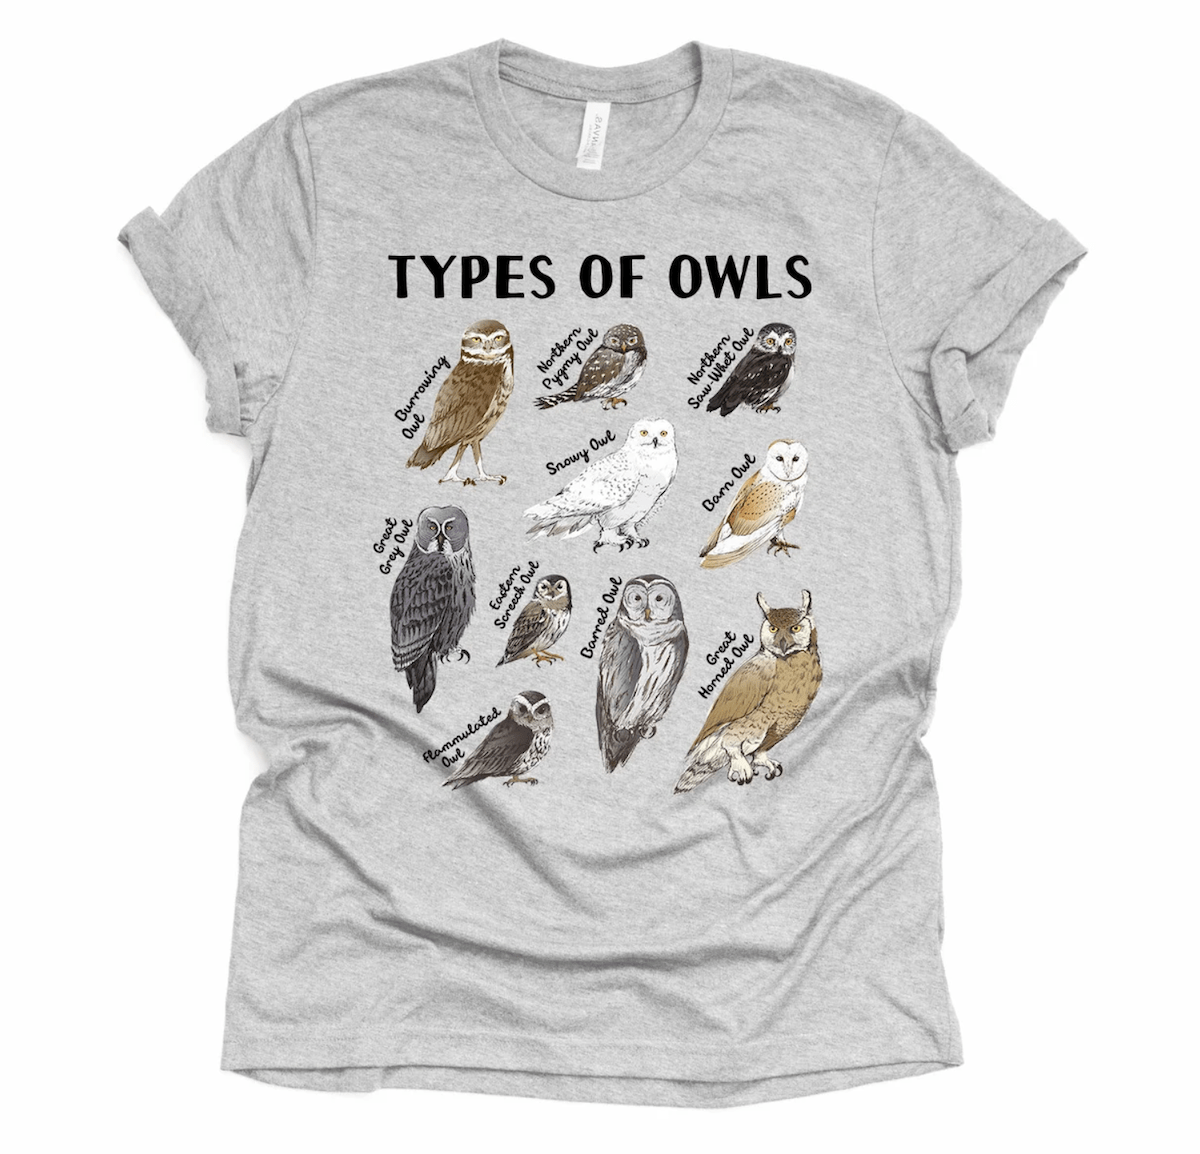 10 Owl Shirts Every Bird Fan Should Own - Birds and Blooms